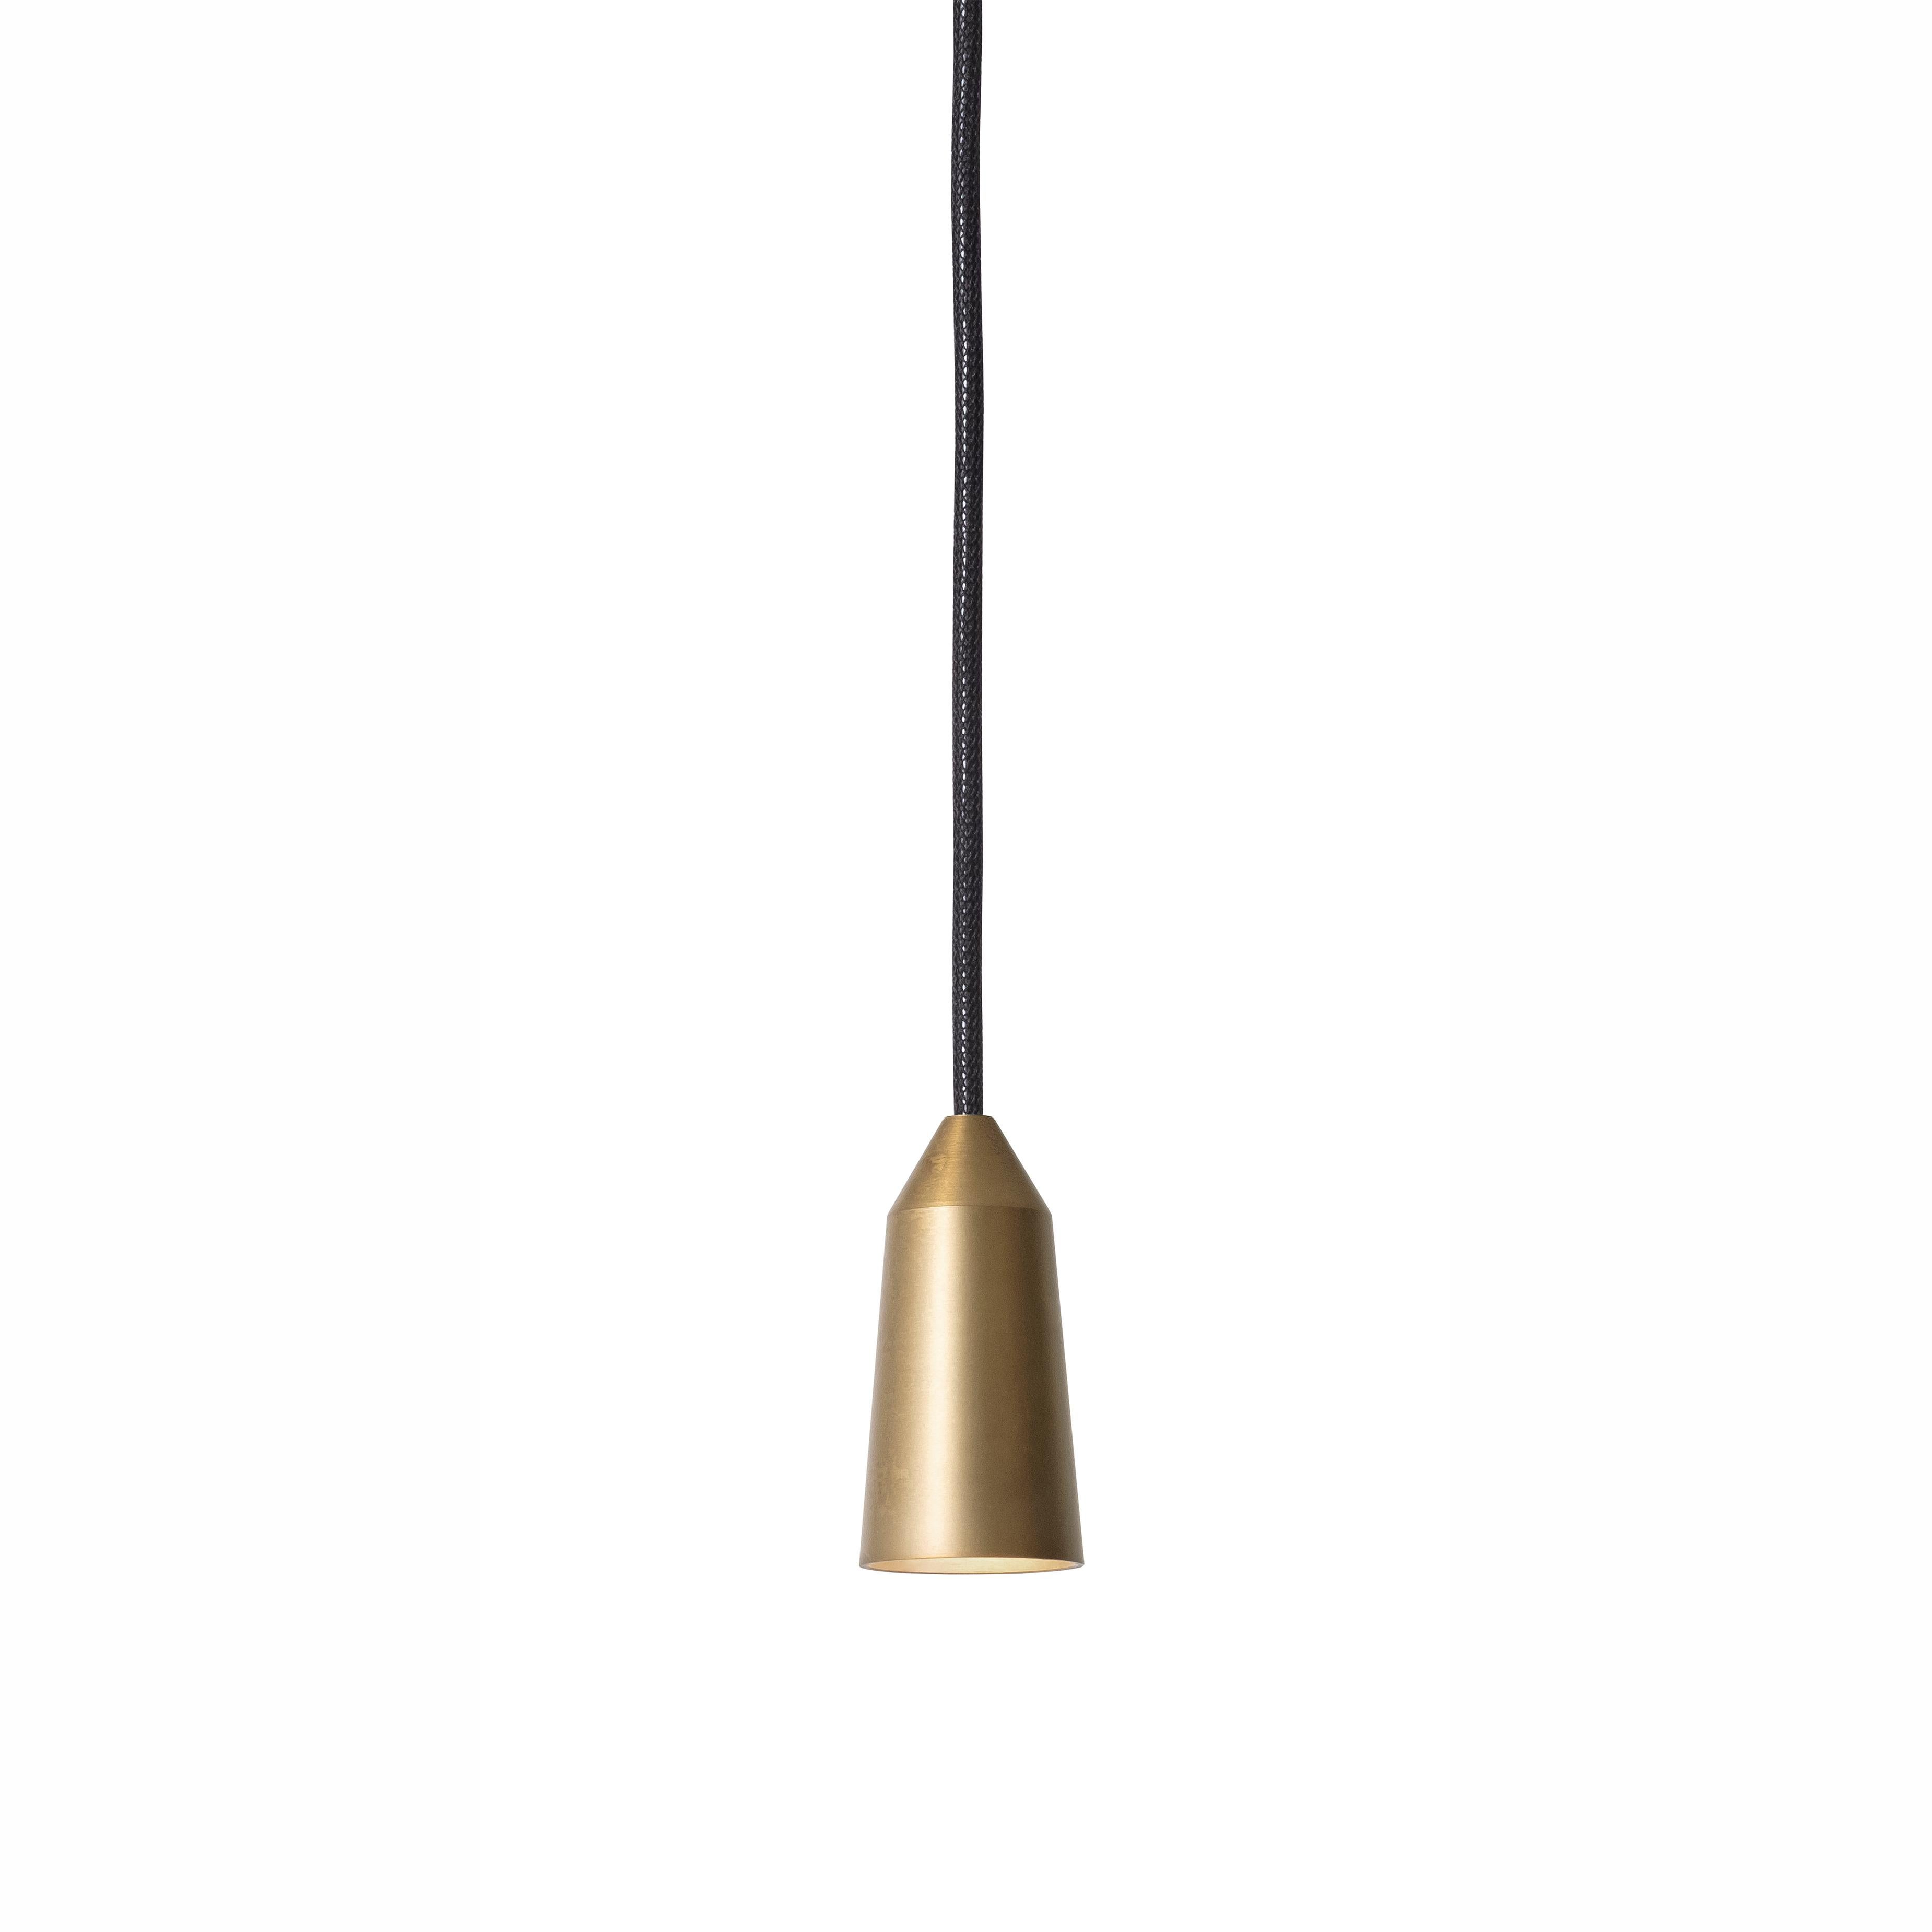 Set of five Ceiling lamp model 3492-6 Massiv Lamp by Henrik Tengler and manufactured by Konsthantverk.

The production of lamps, wall lights and floor lamps are manufactured using craftsman’s techniques with the same materials and techniques as the